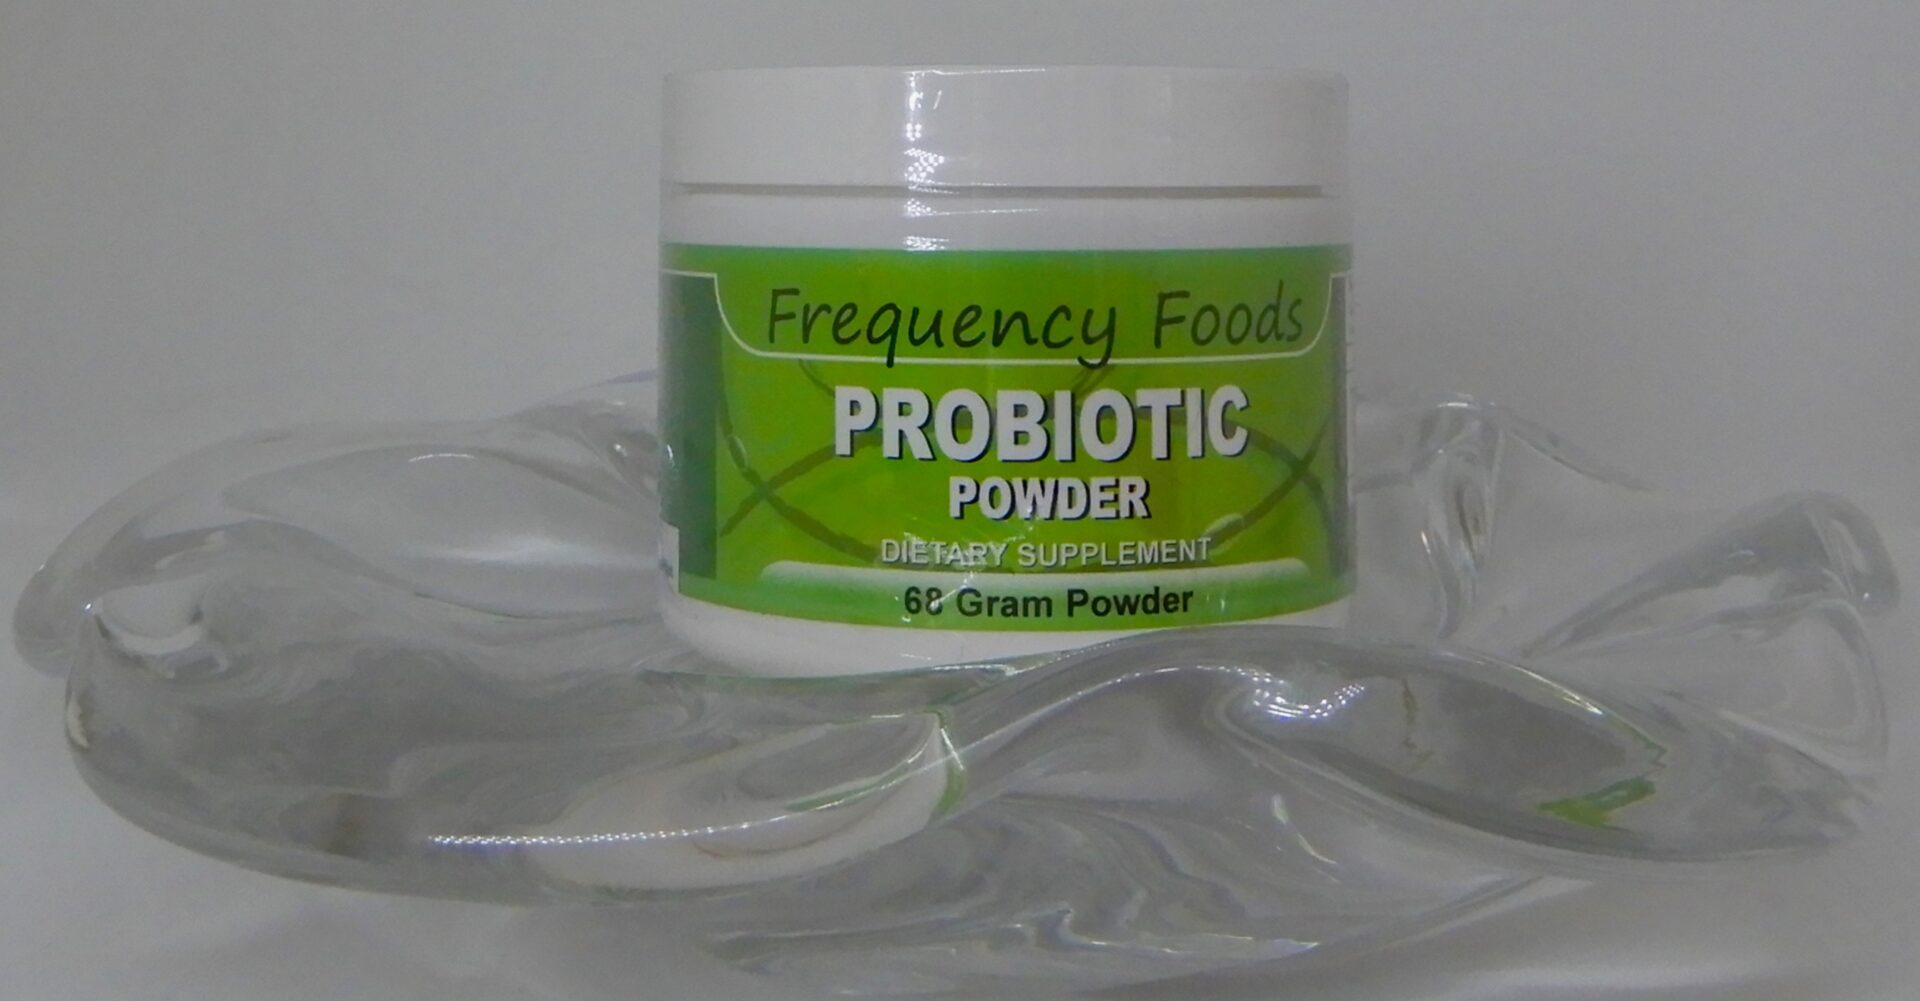 Probiotic powder of Frequency Foods